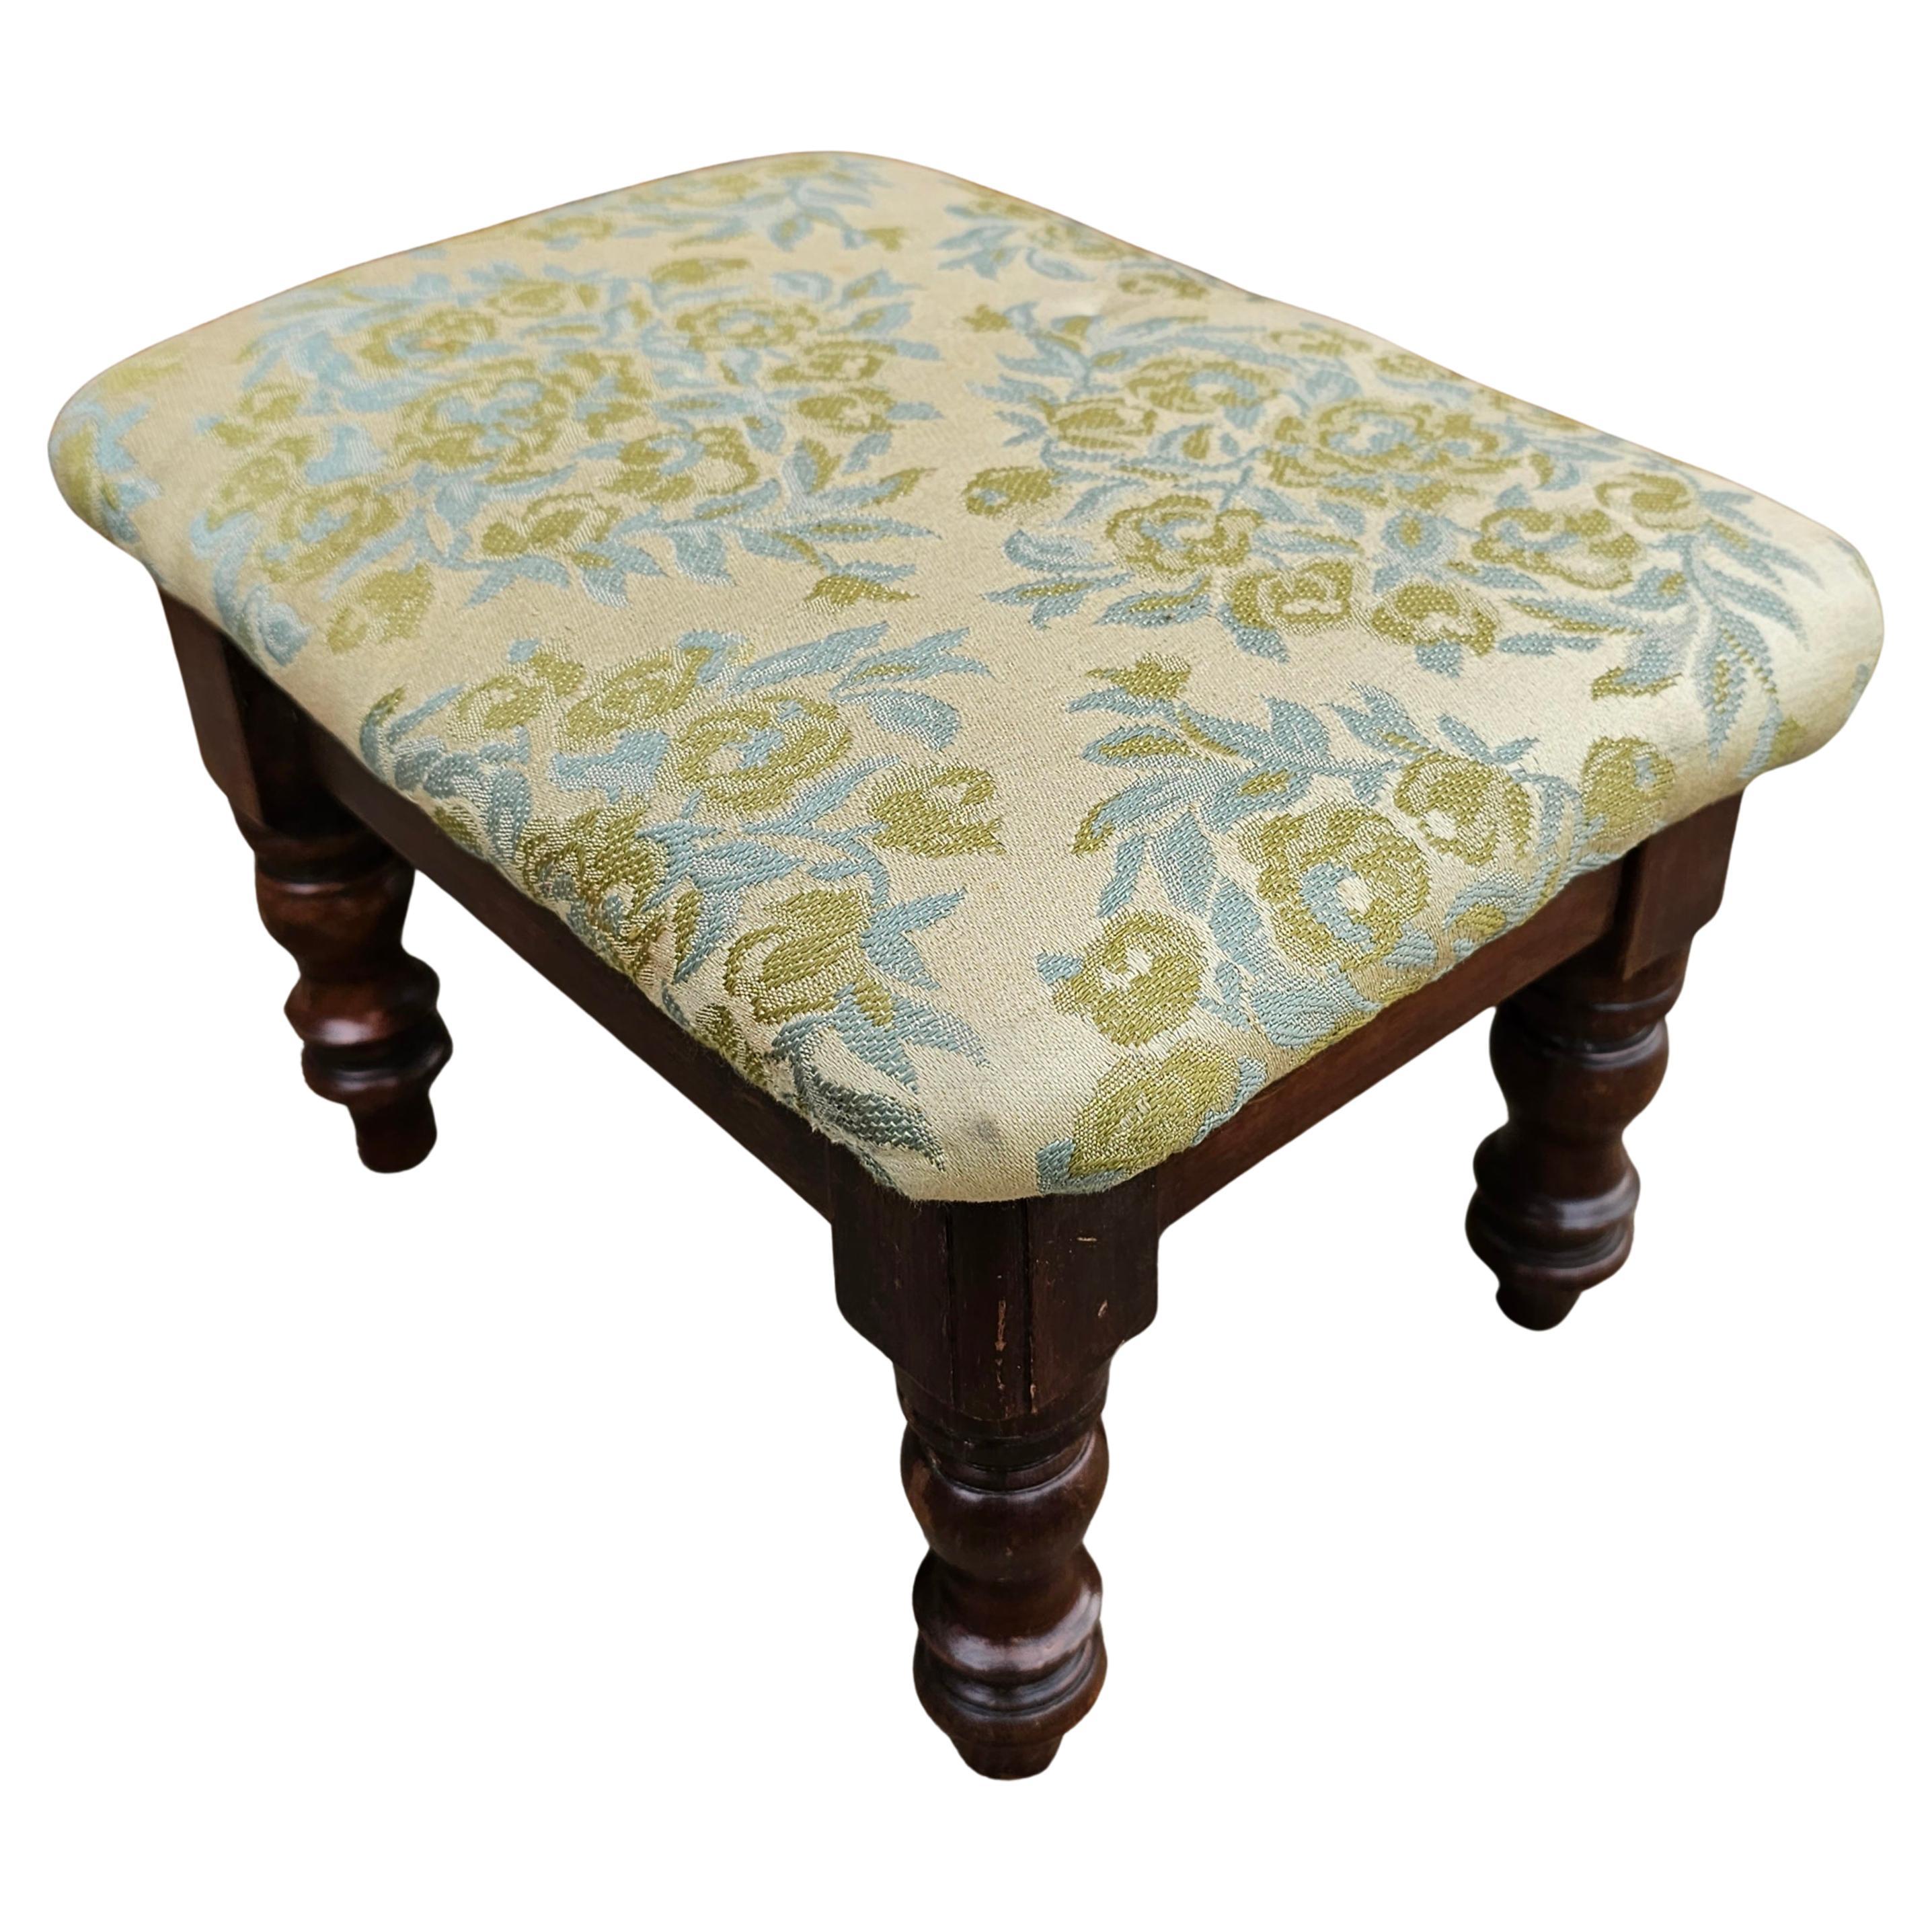 19th Century Edwardian Turned Mahogany and Upholstered Foot Stool For Sale